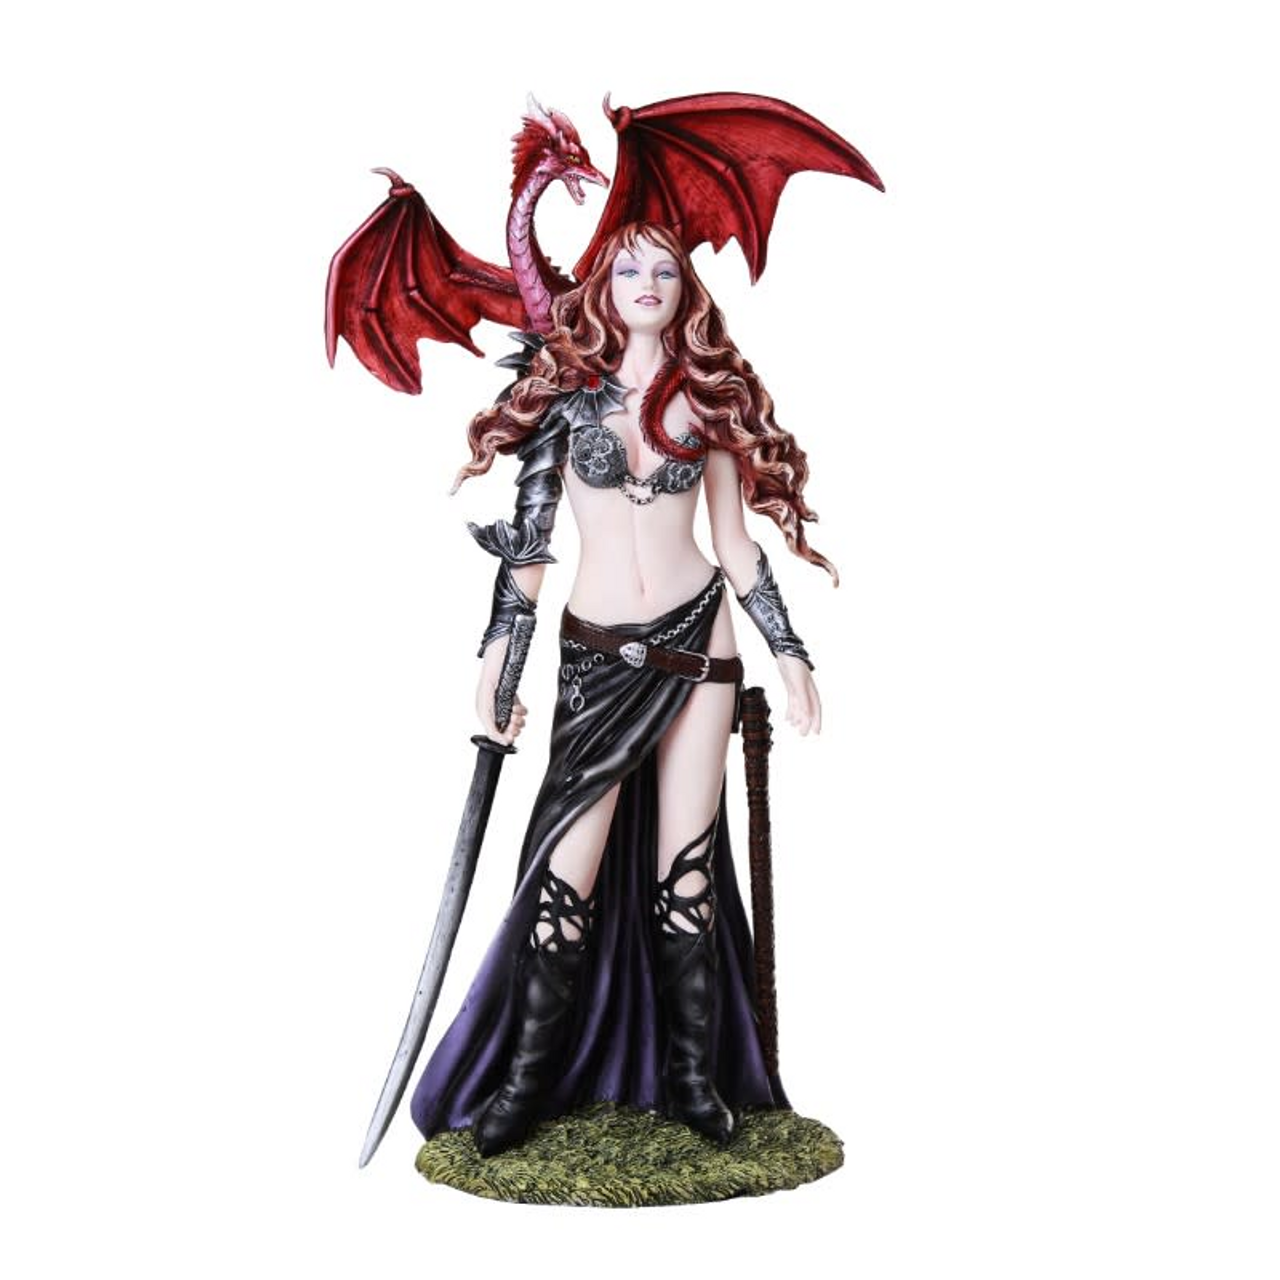 Furionchires Fairy with Dragon Figurine (12.5")